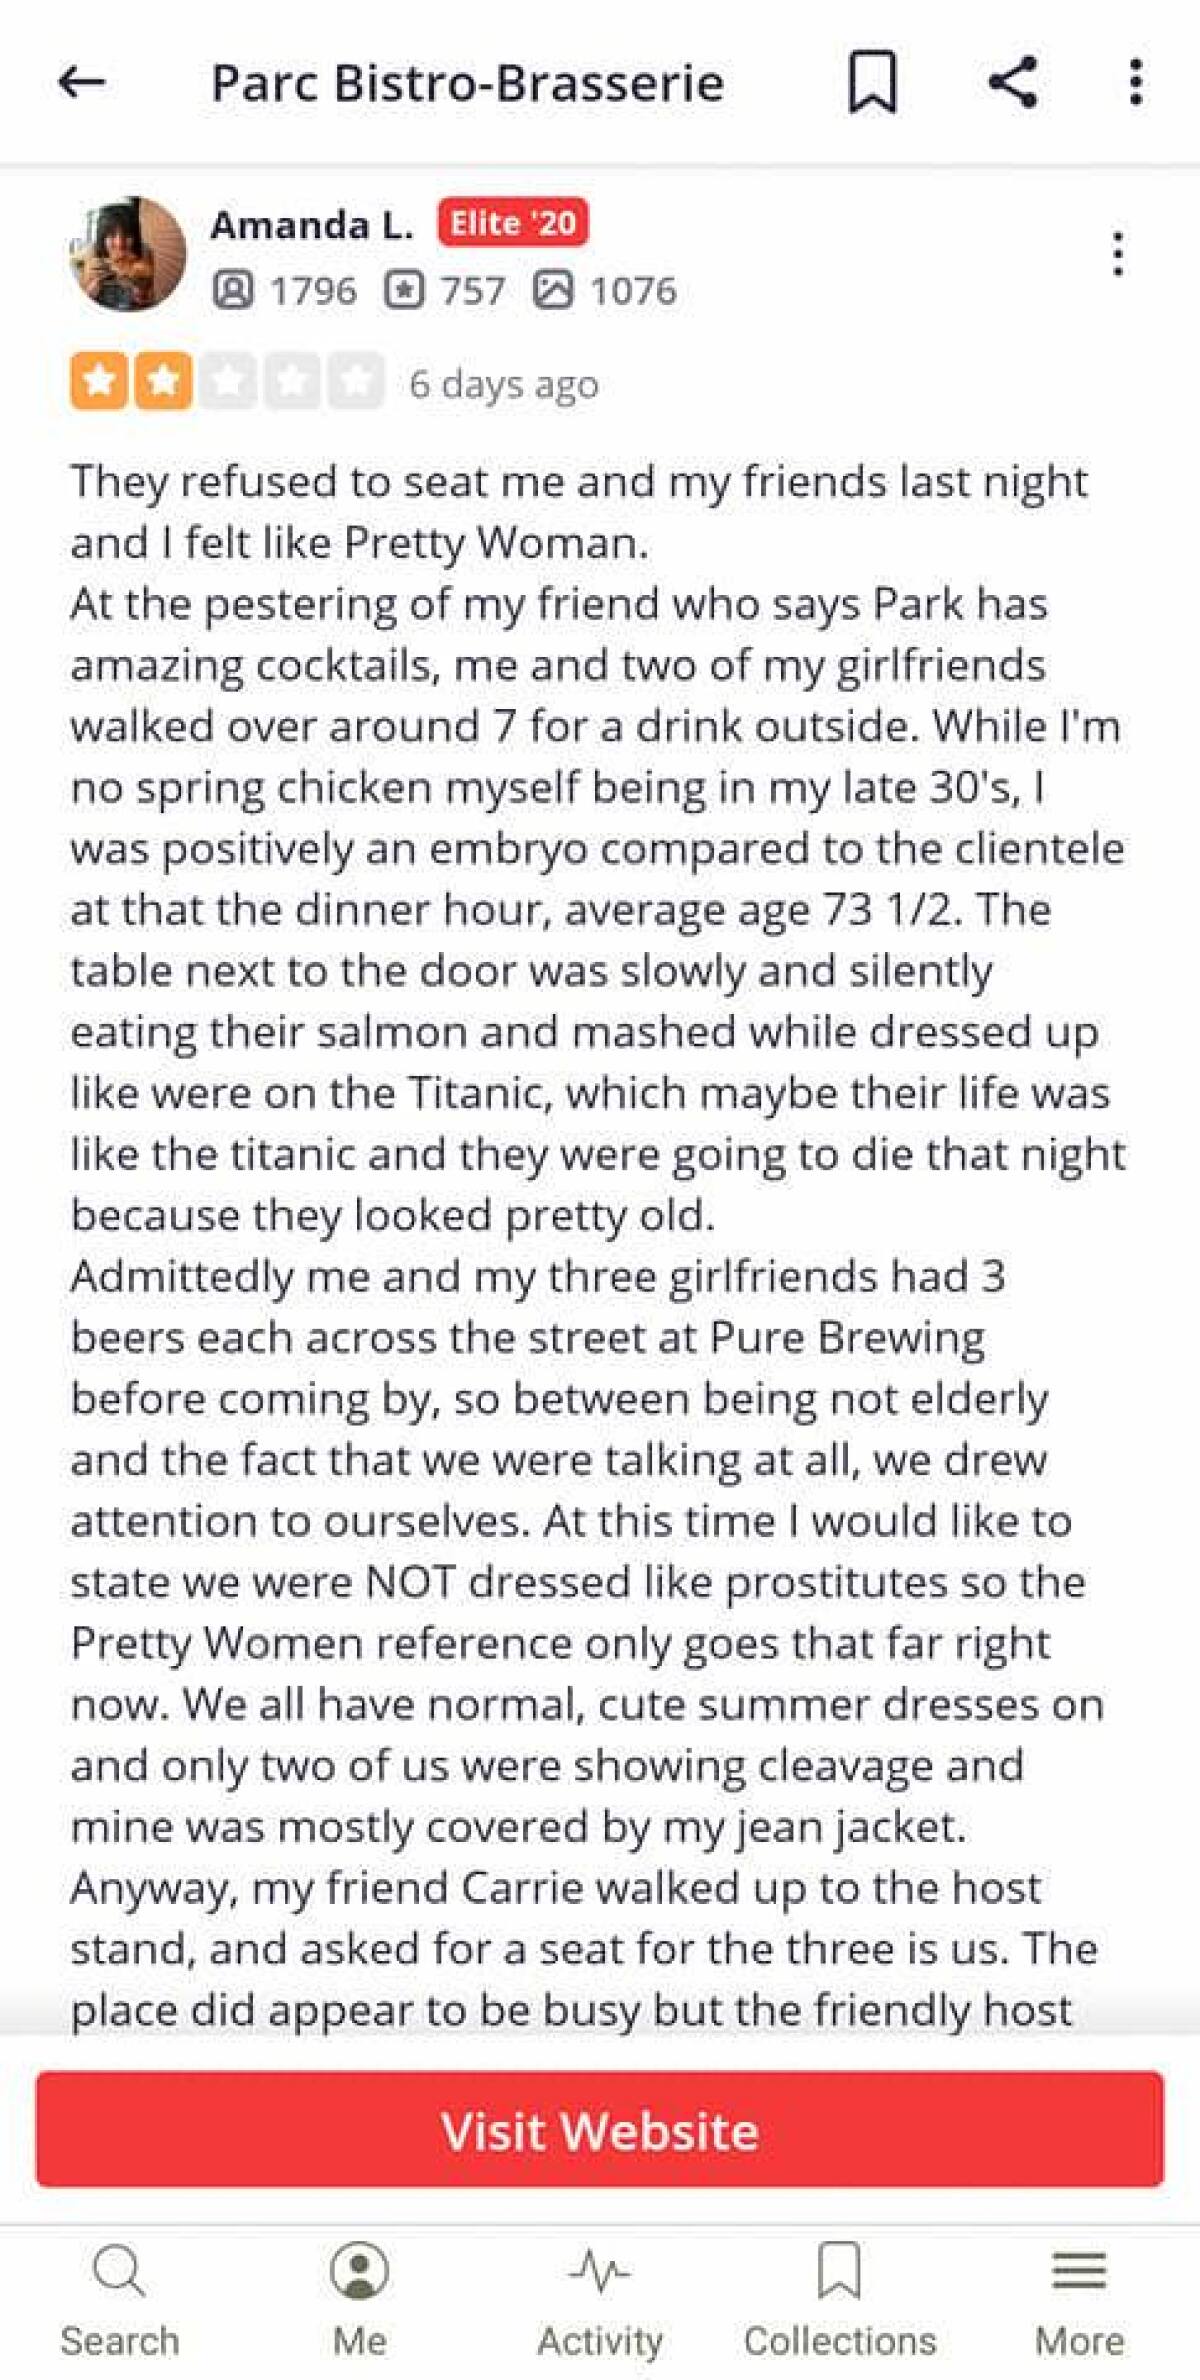 The first part of a negative Yelp review of Parc Bistro-Brasserie in Bankers Hill 